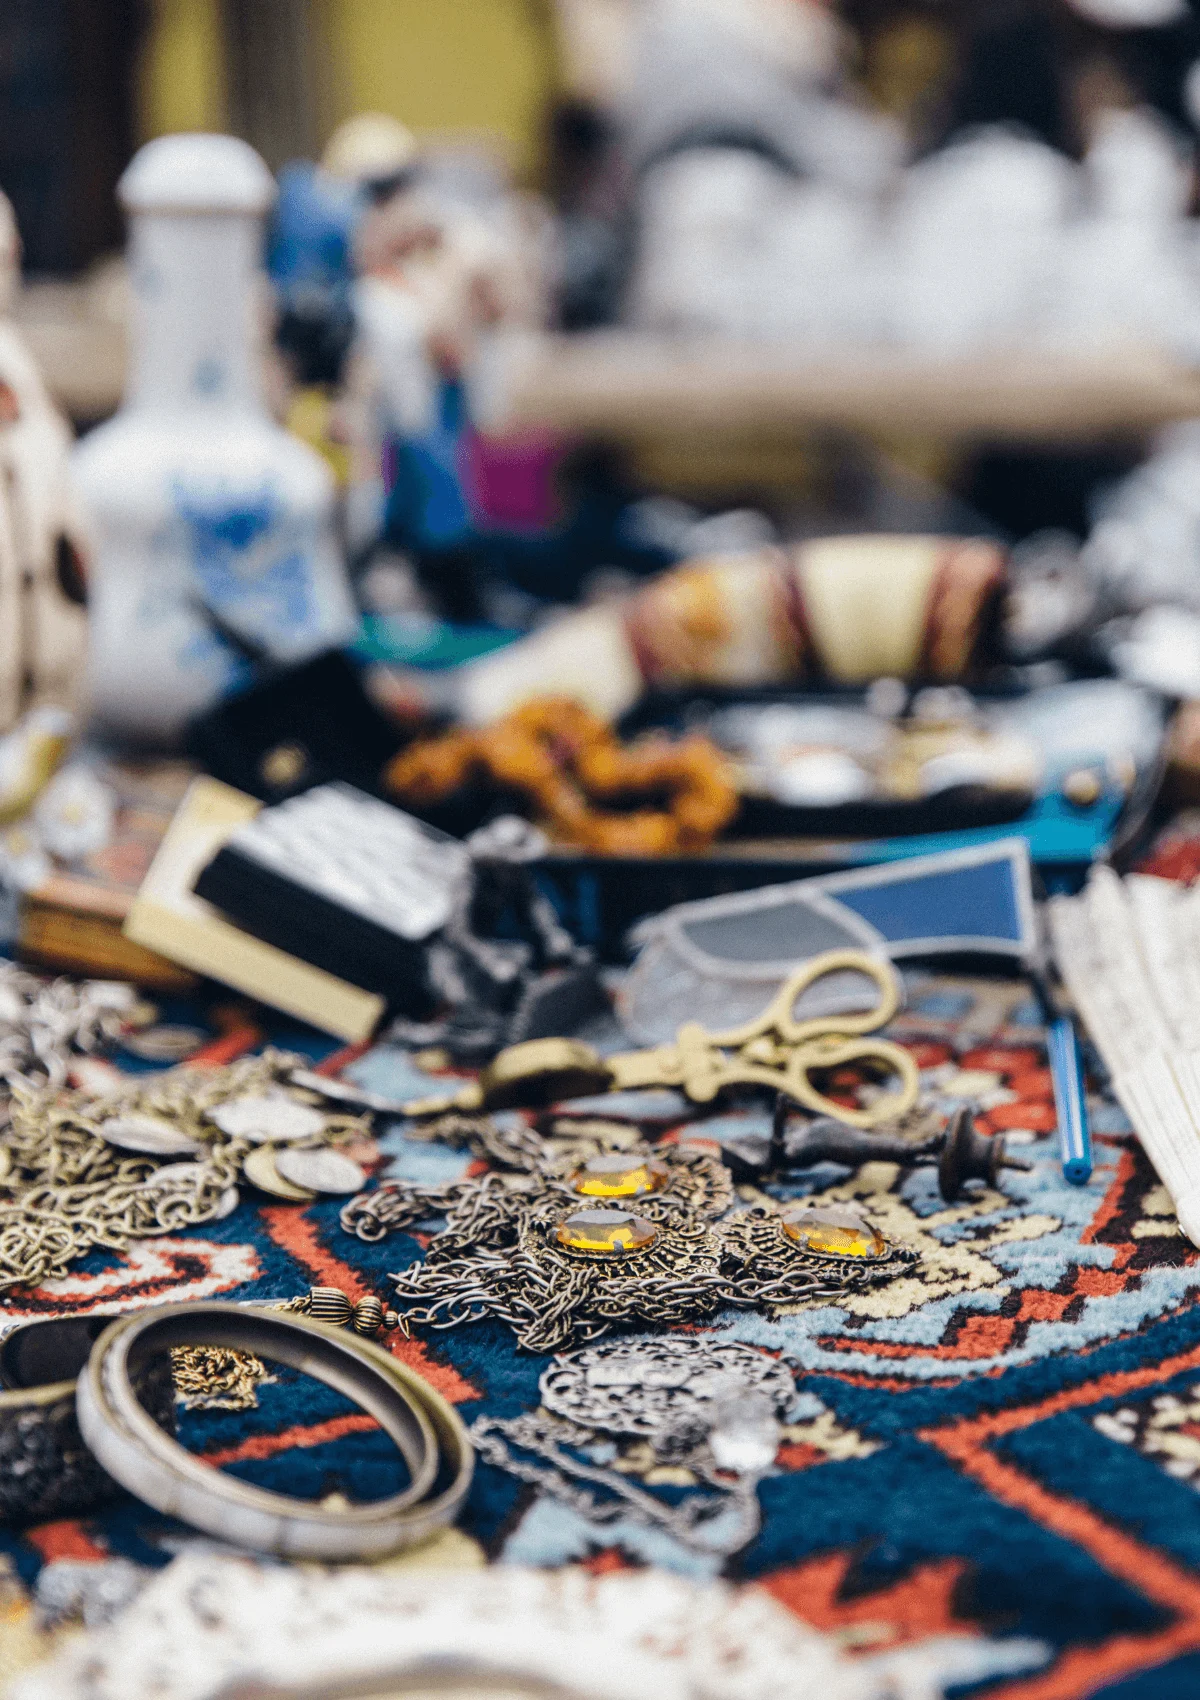 Ecseri Flea Market is one of the best places for souvenir shopping in Budapest